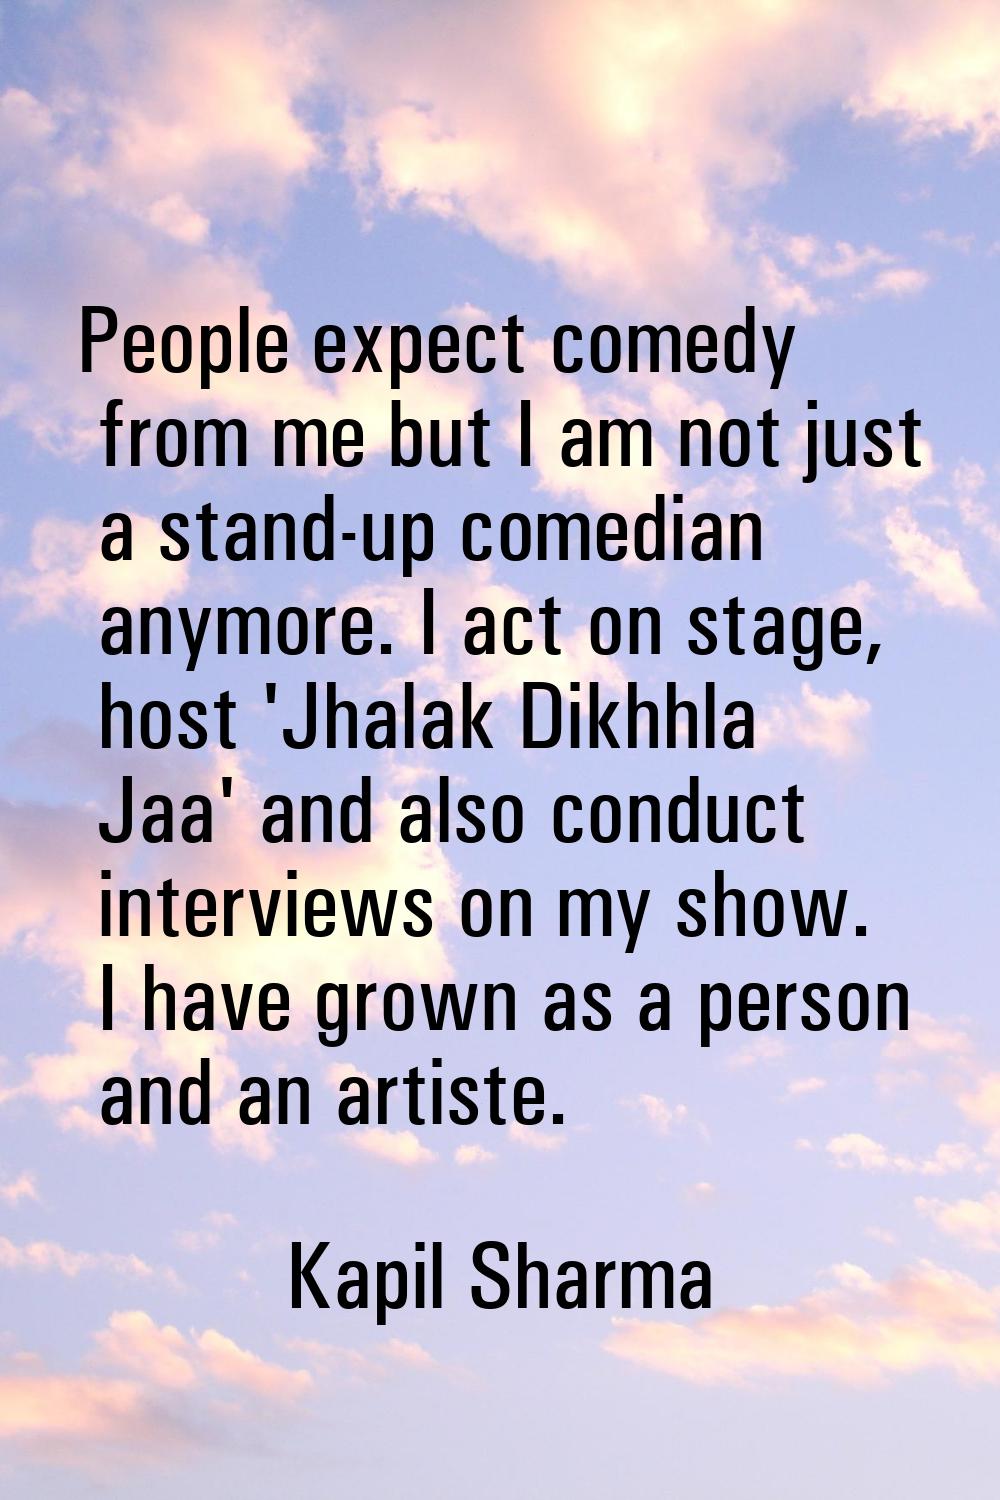 People expect comedy from me but I am not just a stand-up comedian anymore. I act on stage, host 'J